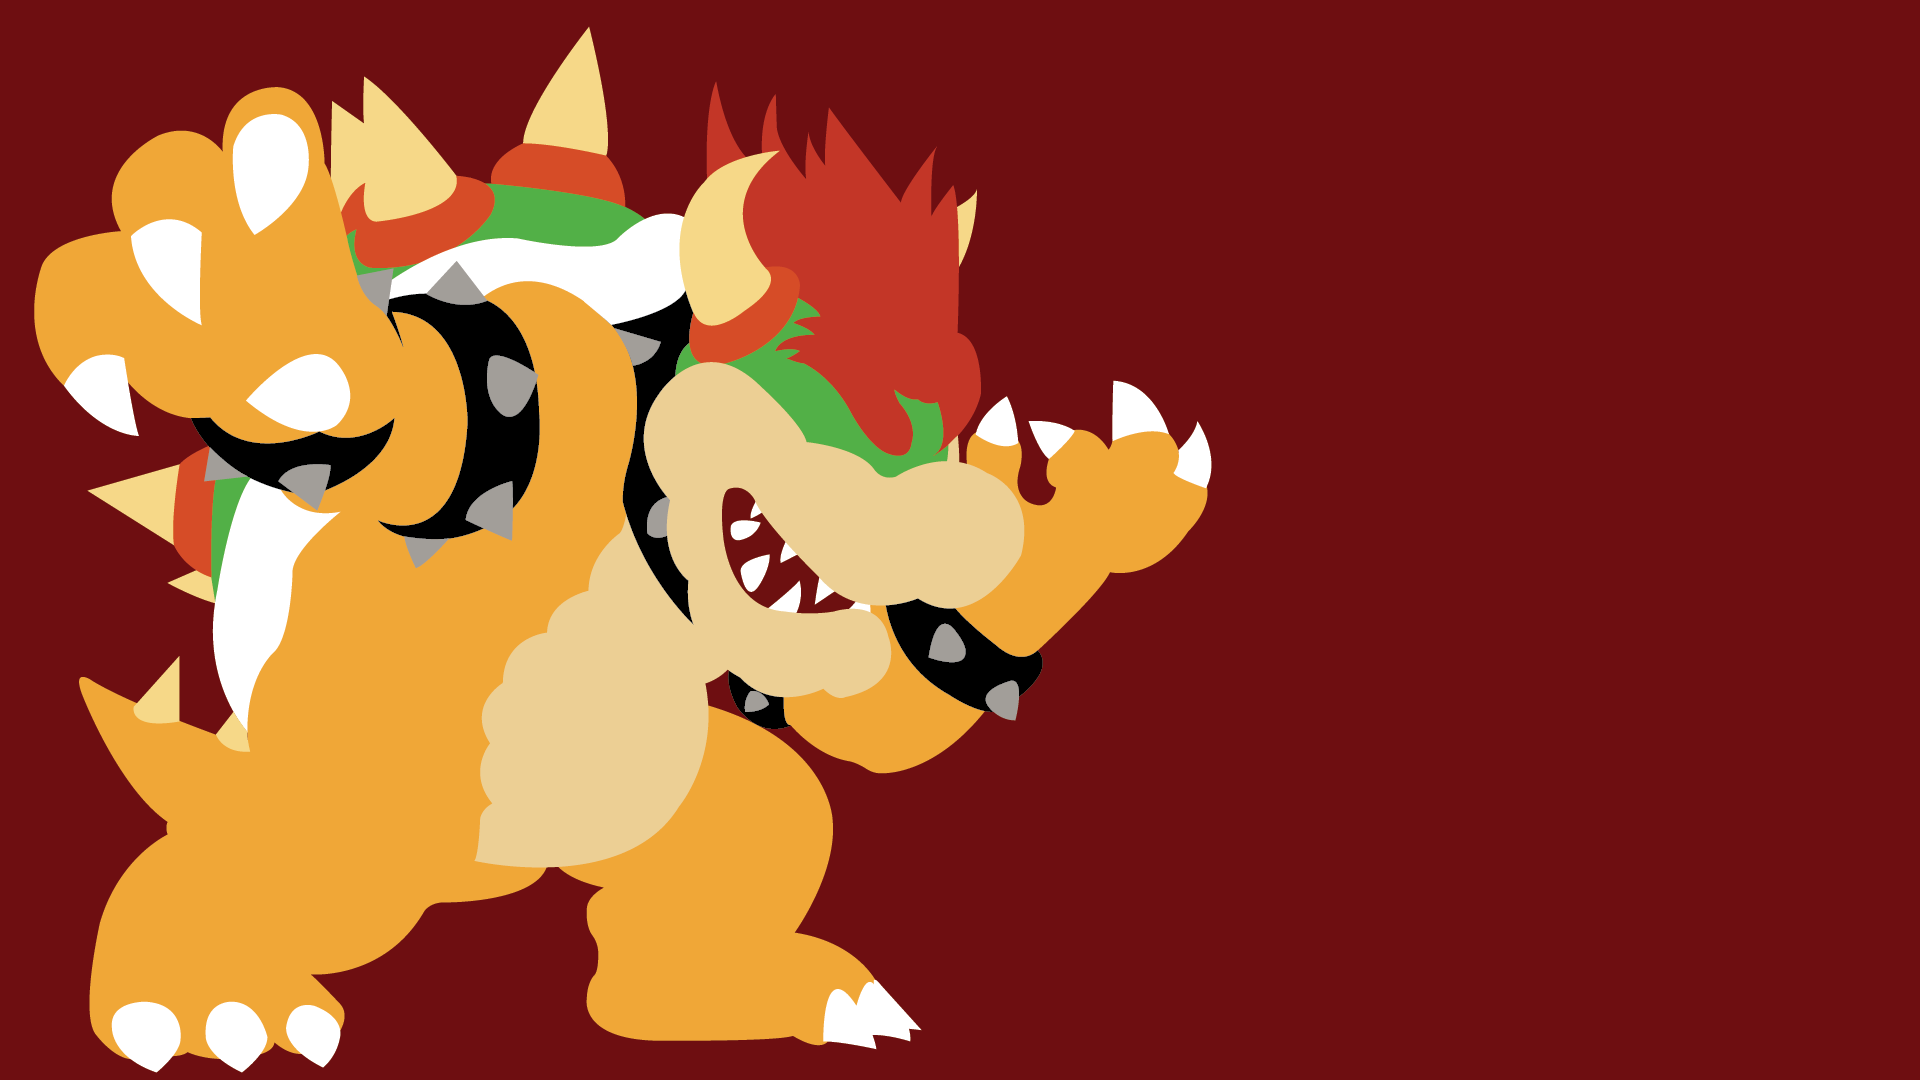 Bowser Wallpapers